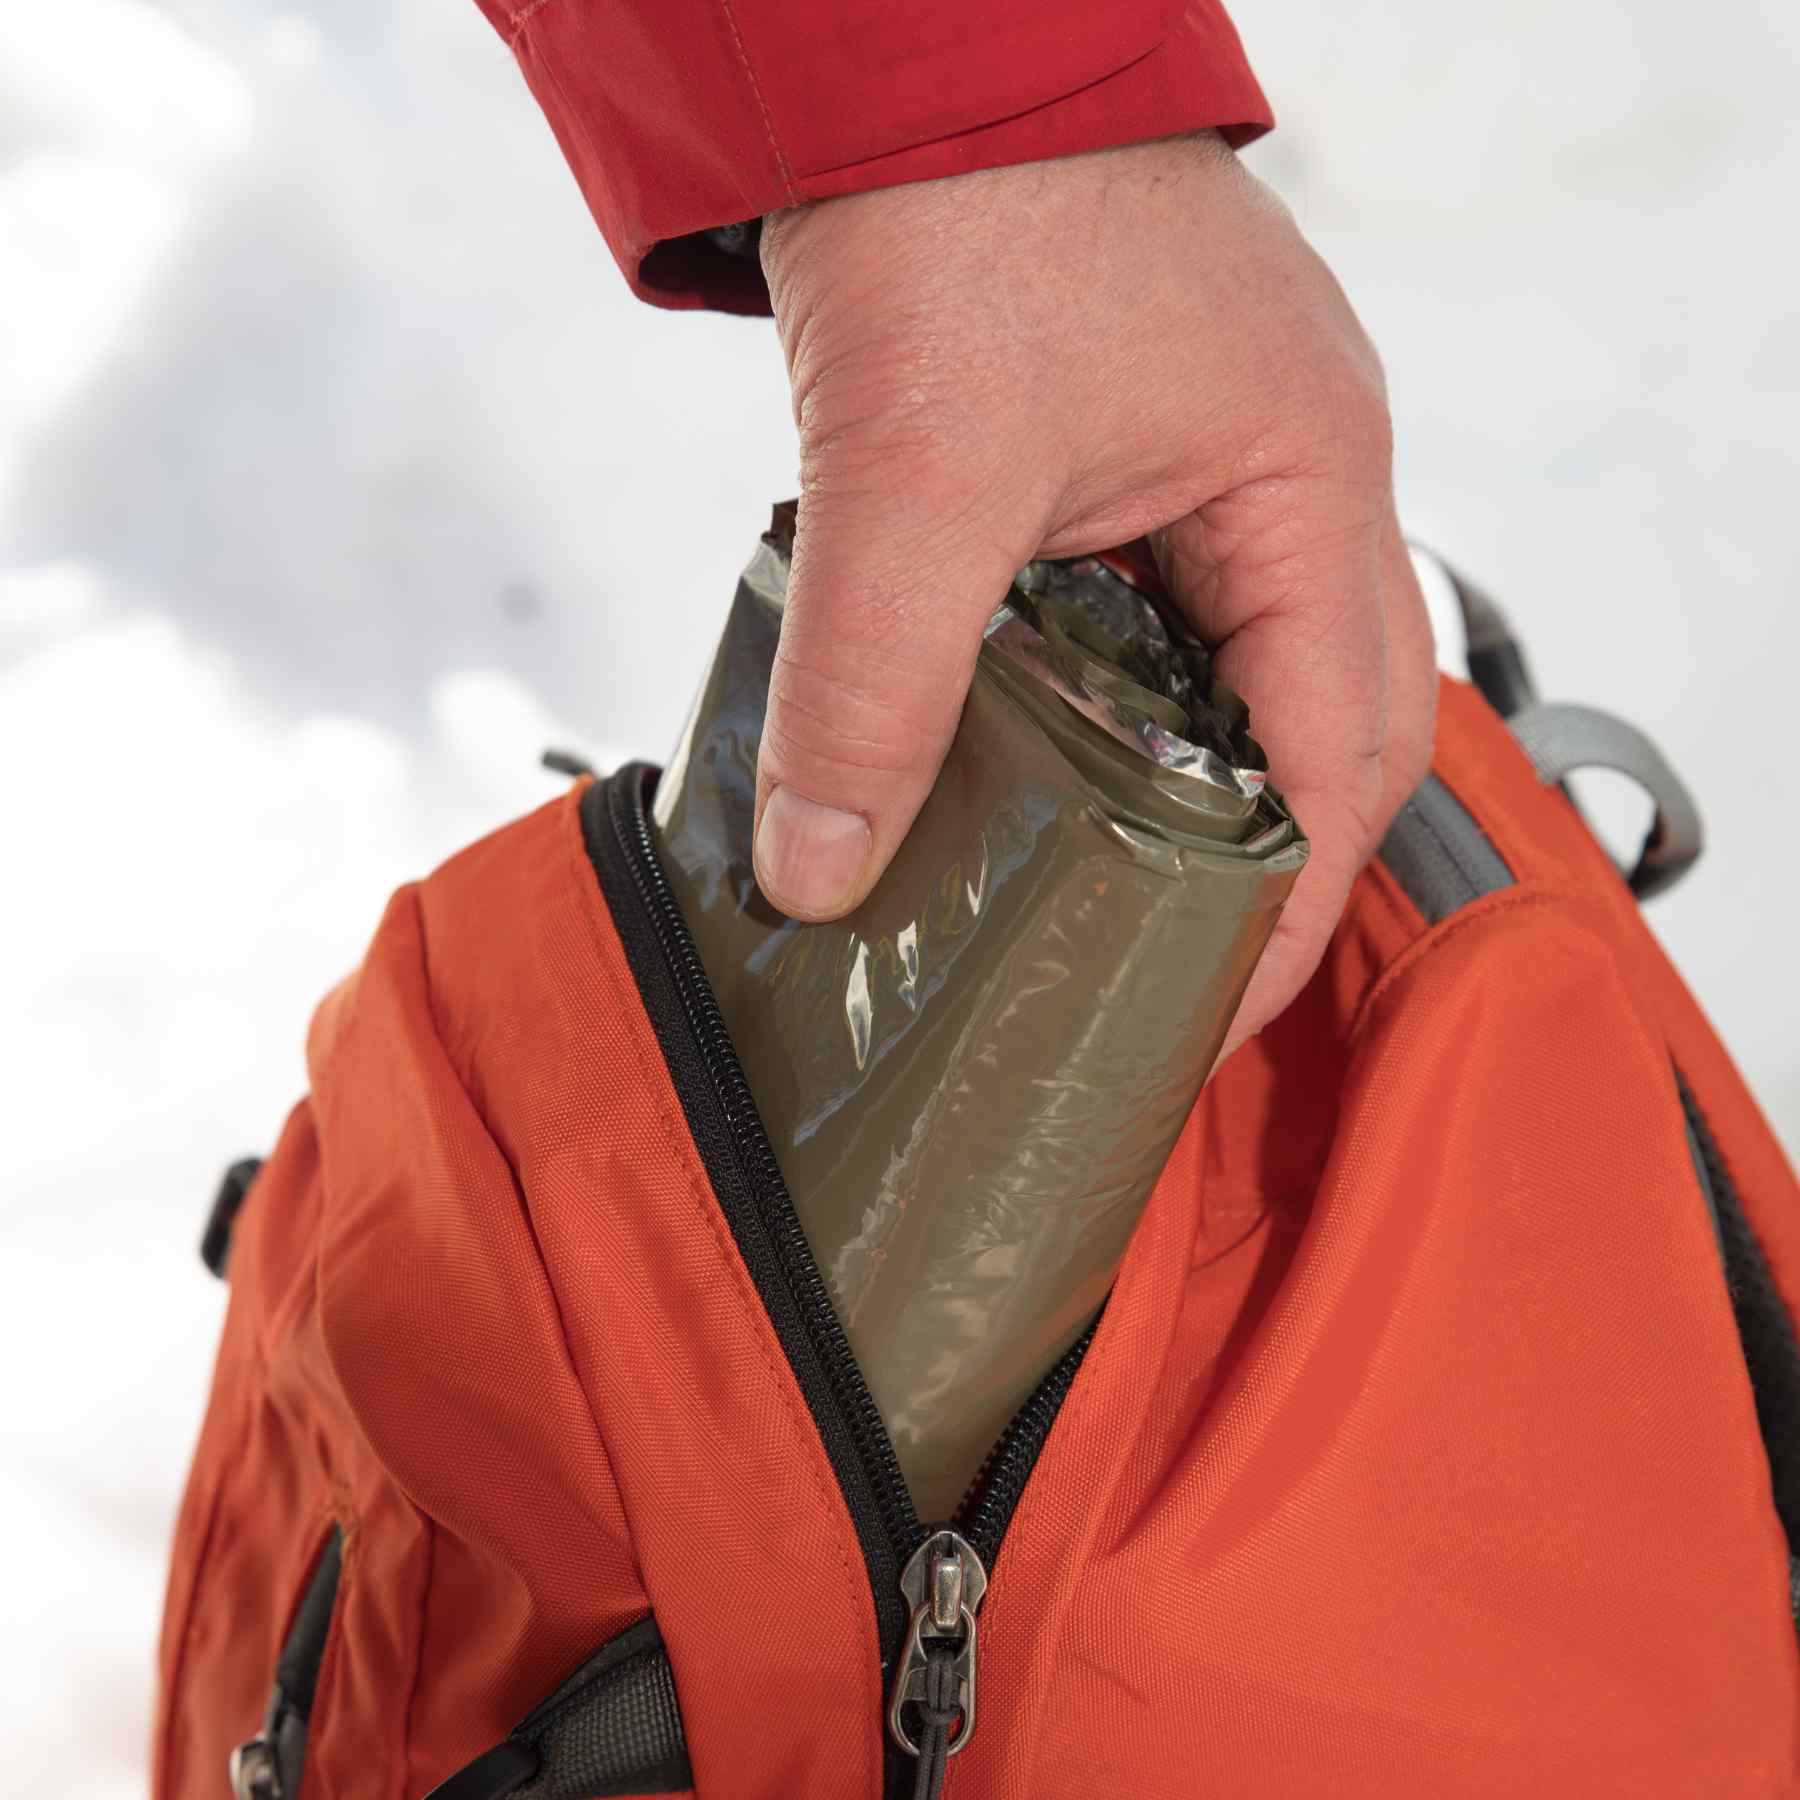 Heavy Duty Emergency Blanket being placed in a backpack